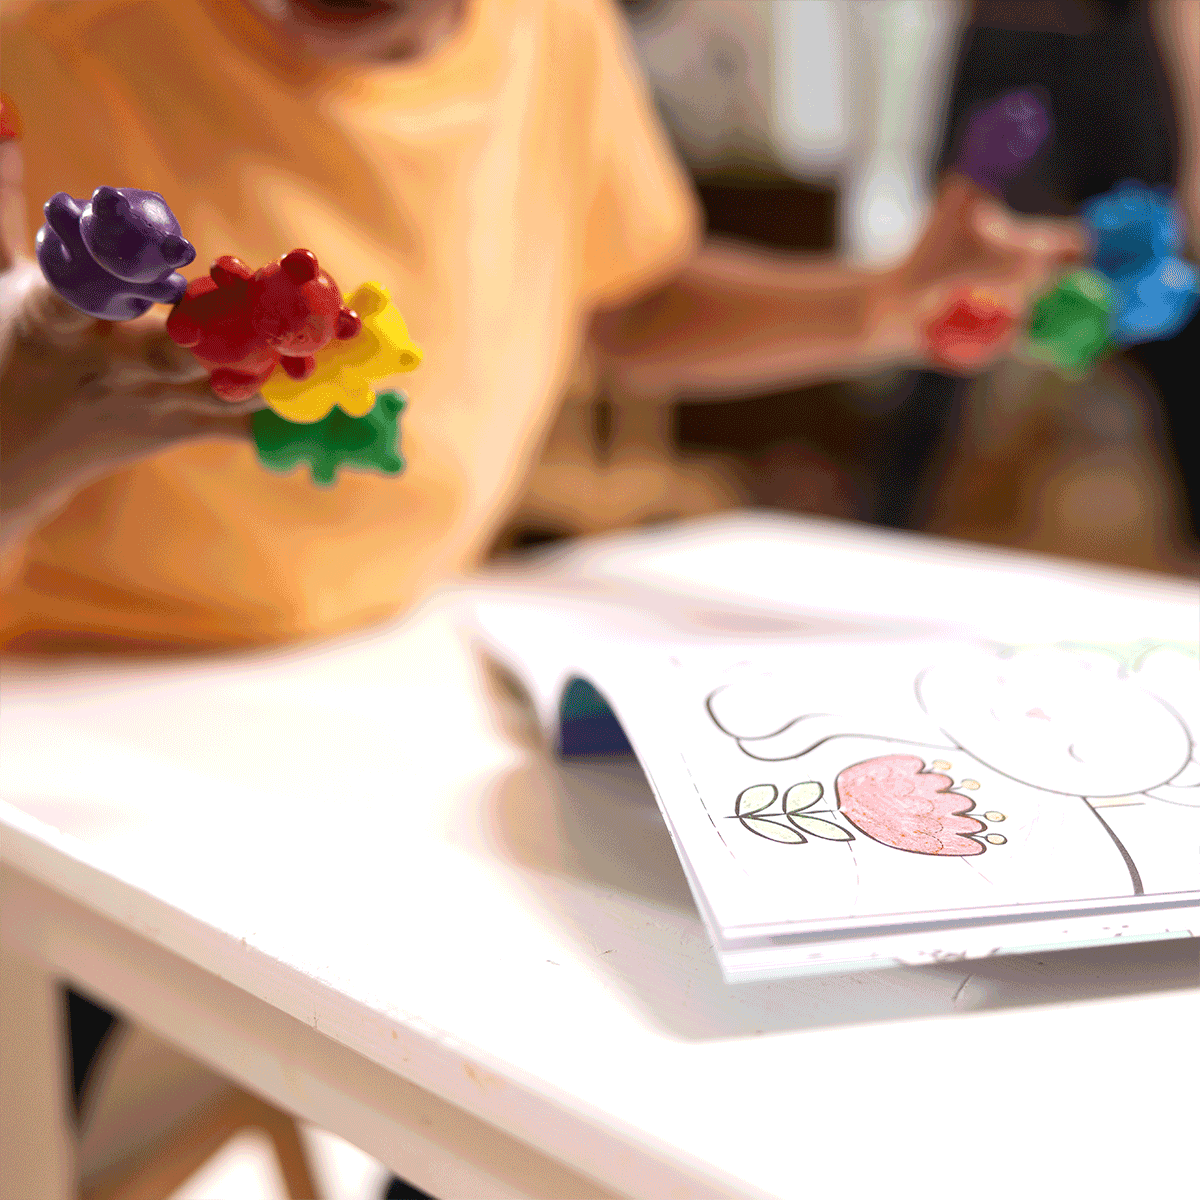 Kid with Cuddly Cubs bear finger crayons on fingers with coloring book